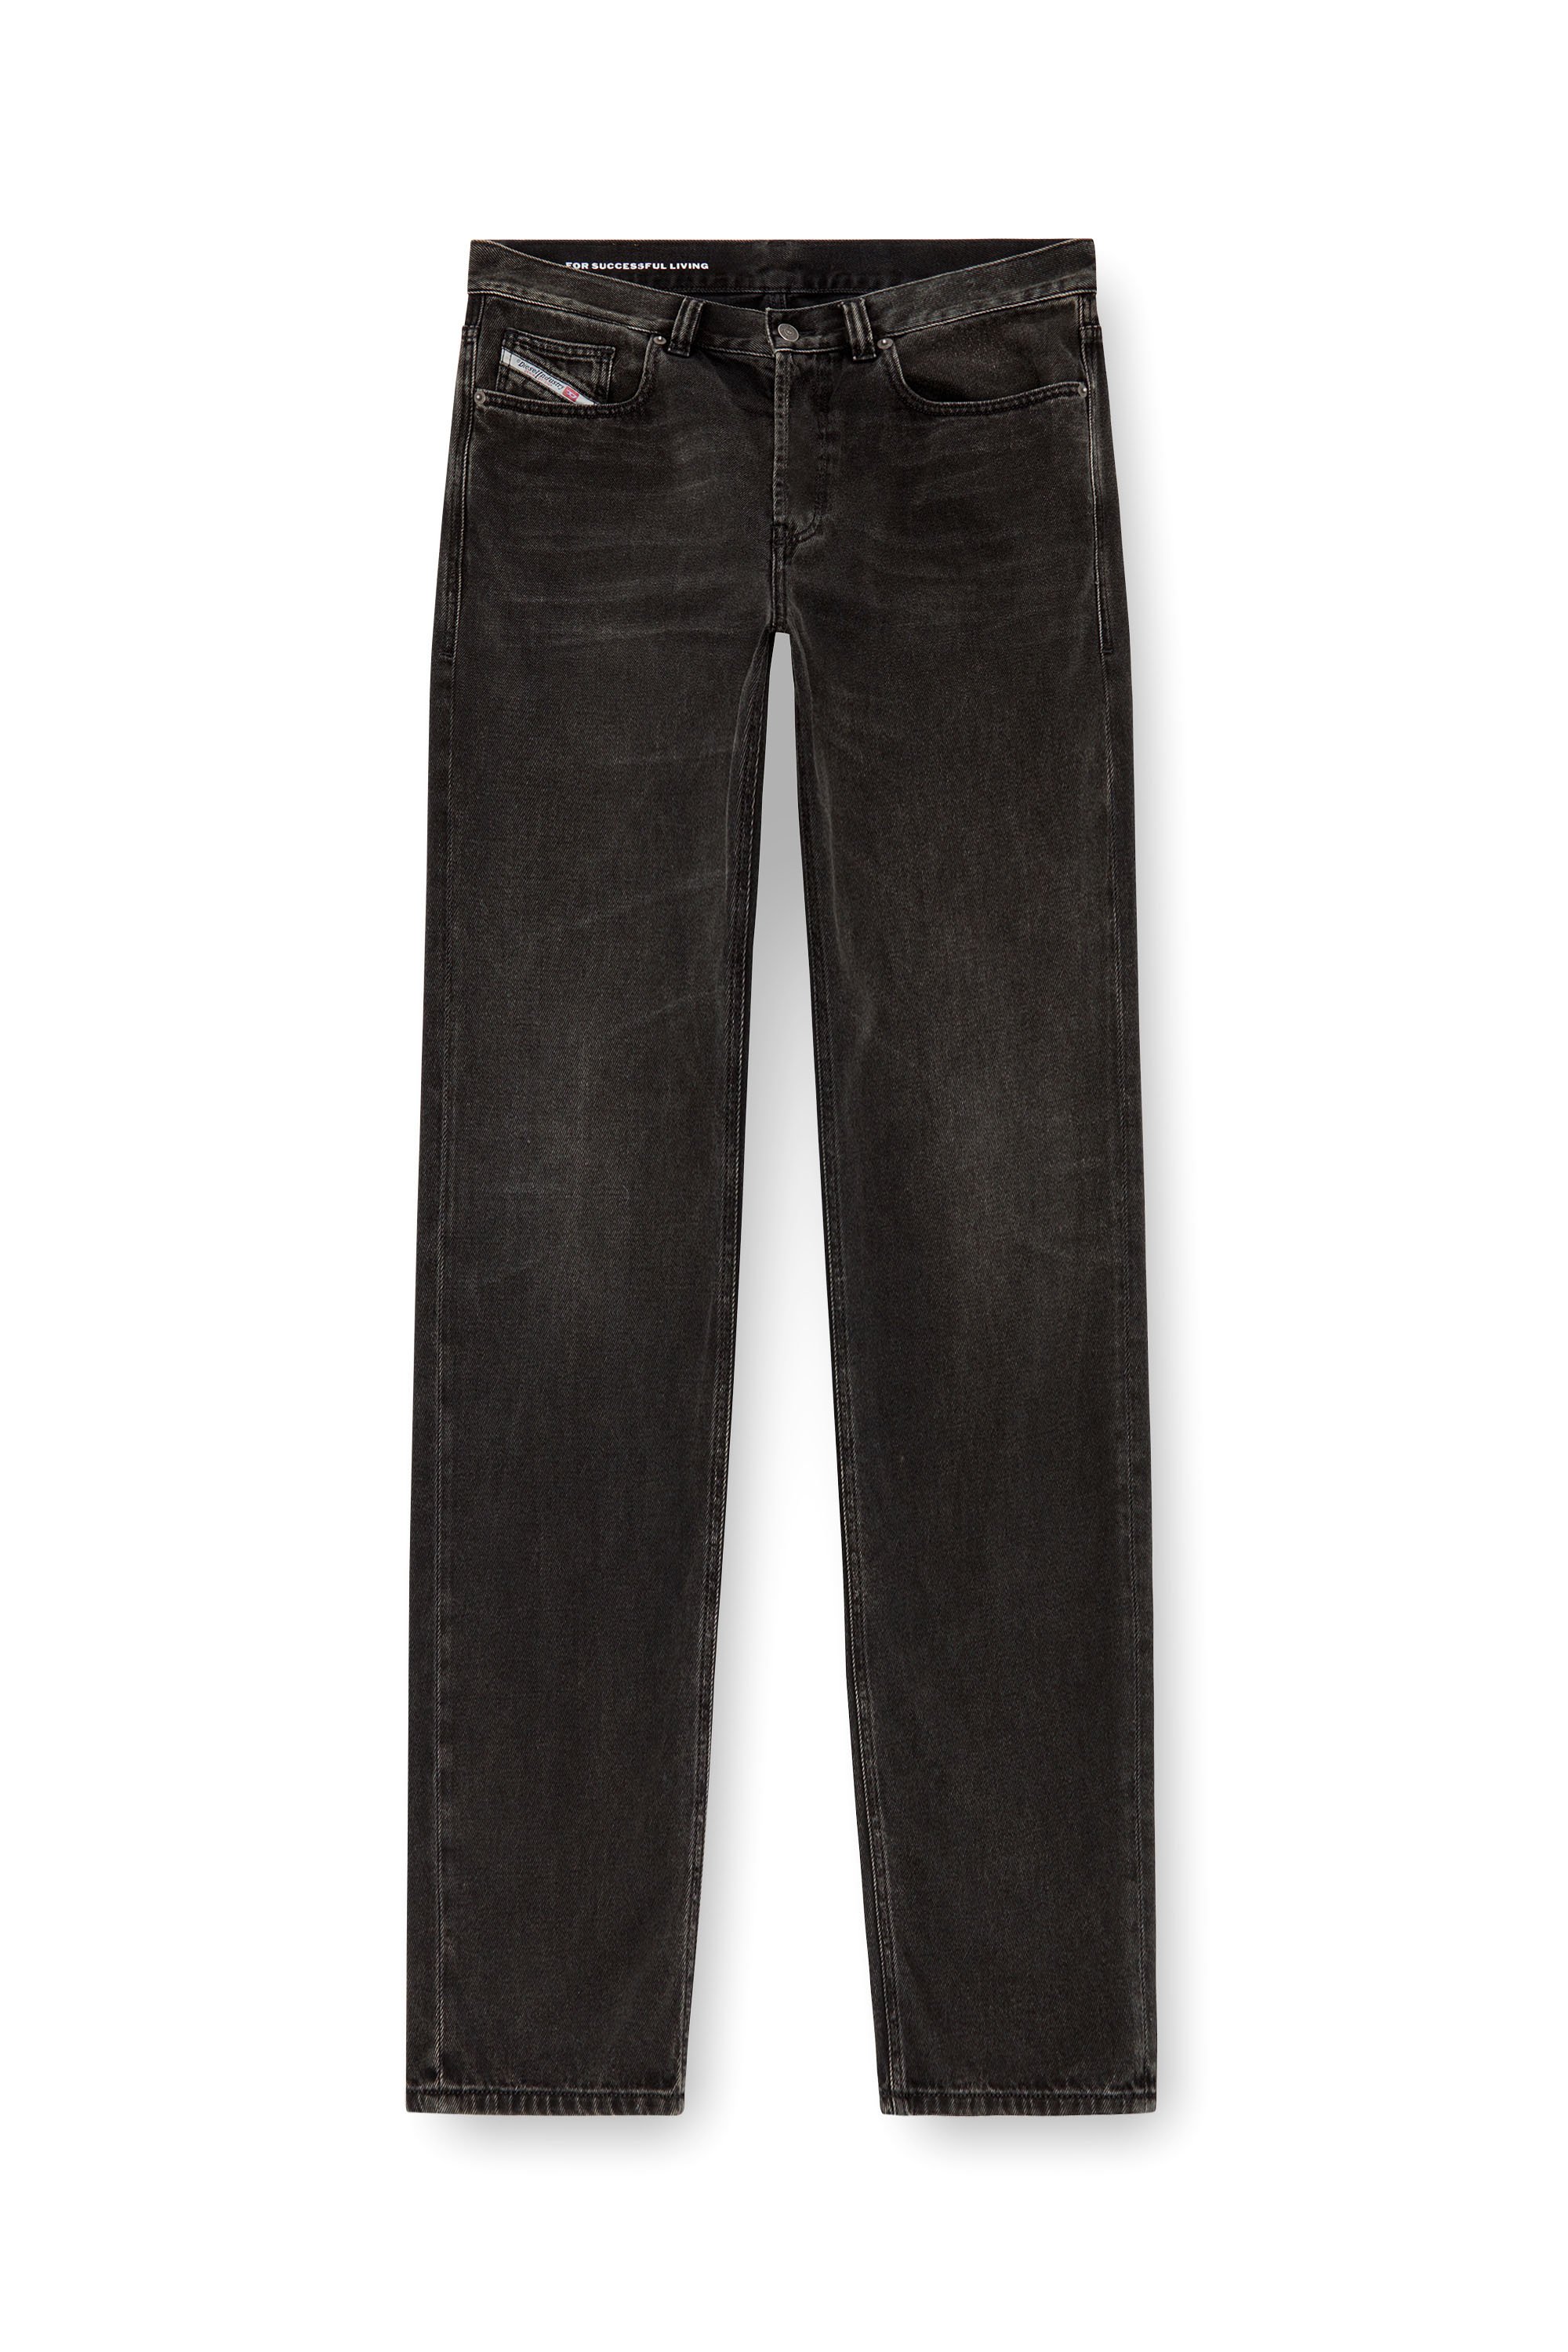 Diesel - Straight Jeans 2010 D-Macs 09J96, Hombre Straight Jeans - 2010 D-Macs in Negro - Image 3